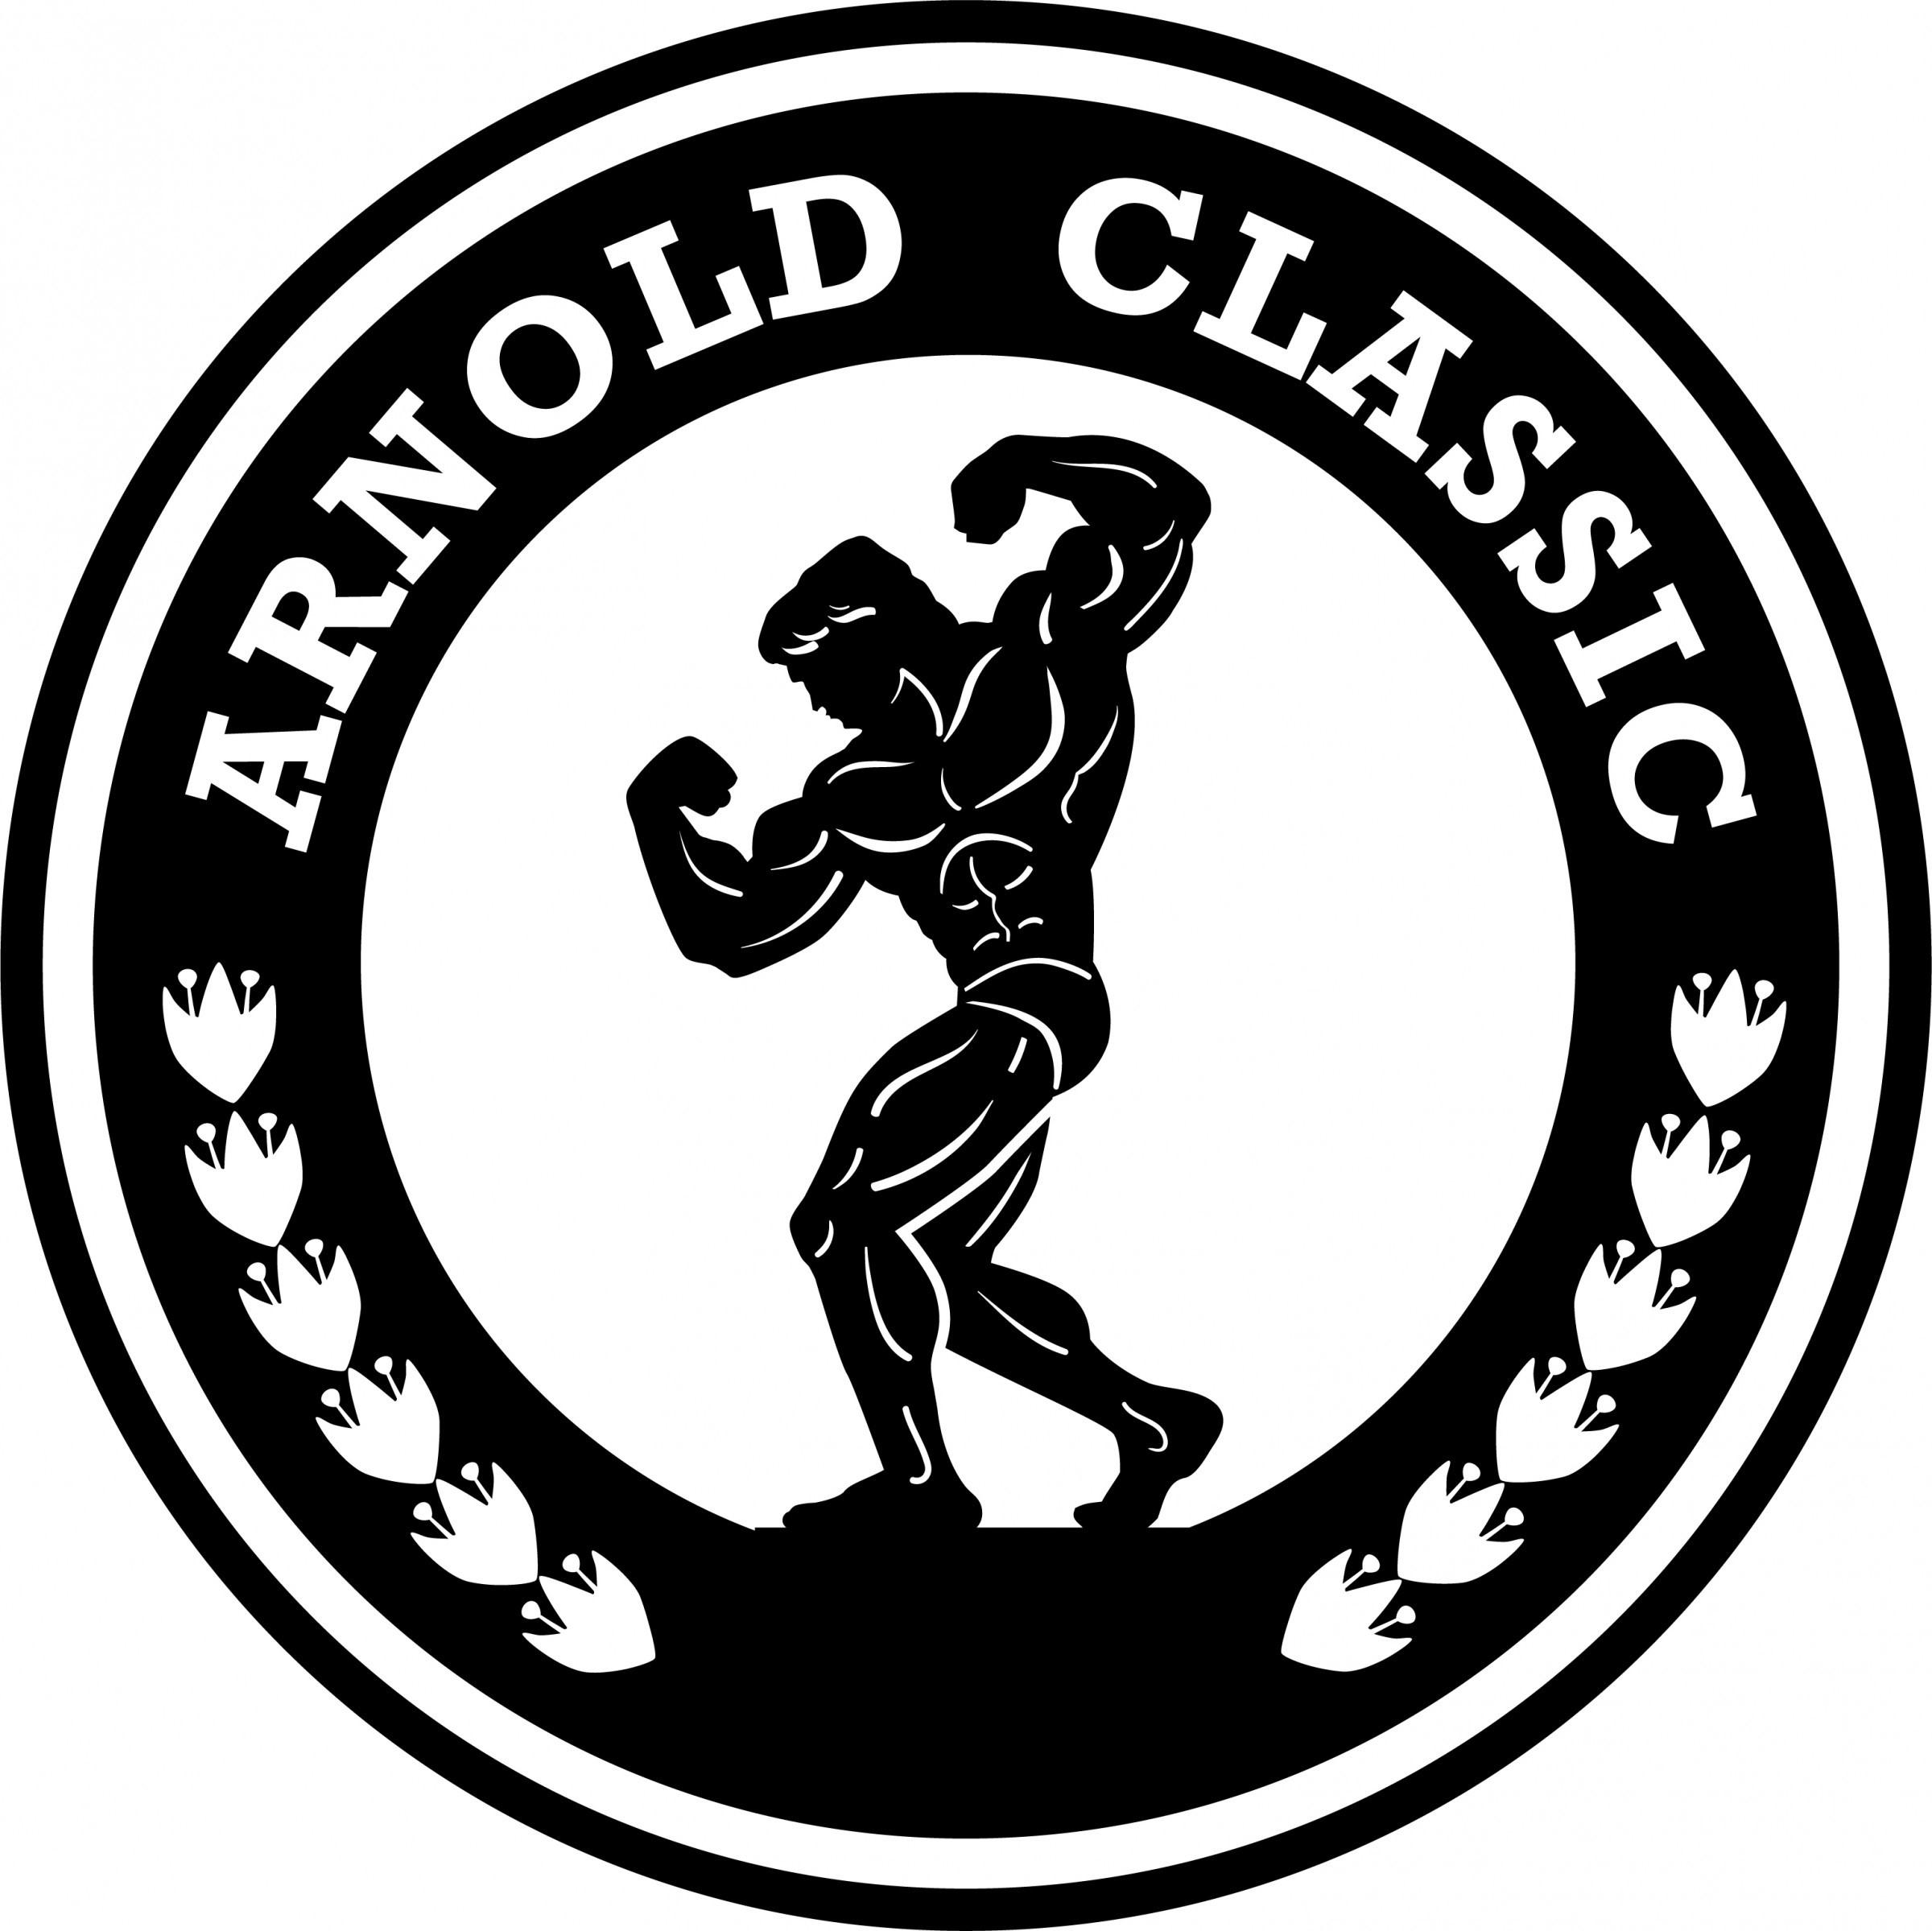 Arnold Classic to Increase Men's Open Bodybuilding FirstPlace Prize